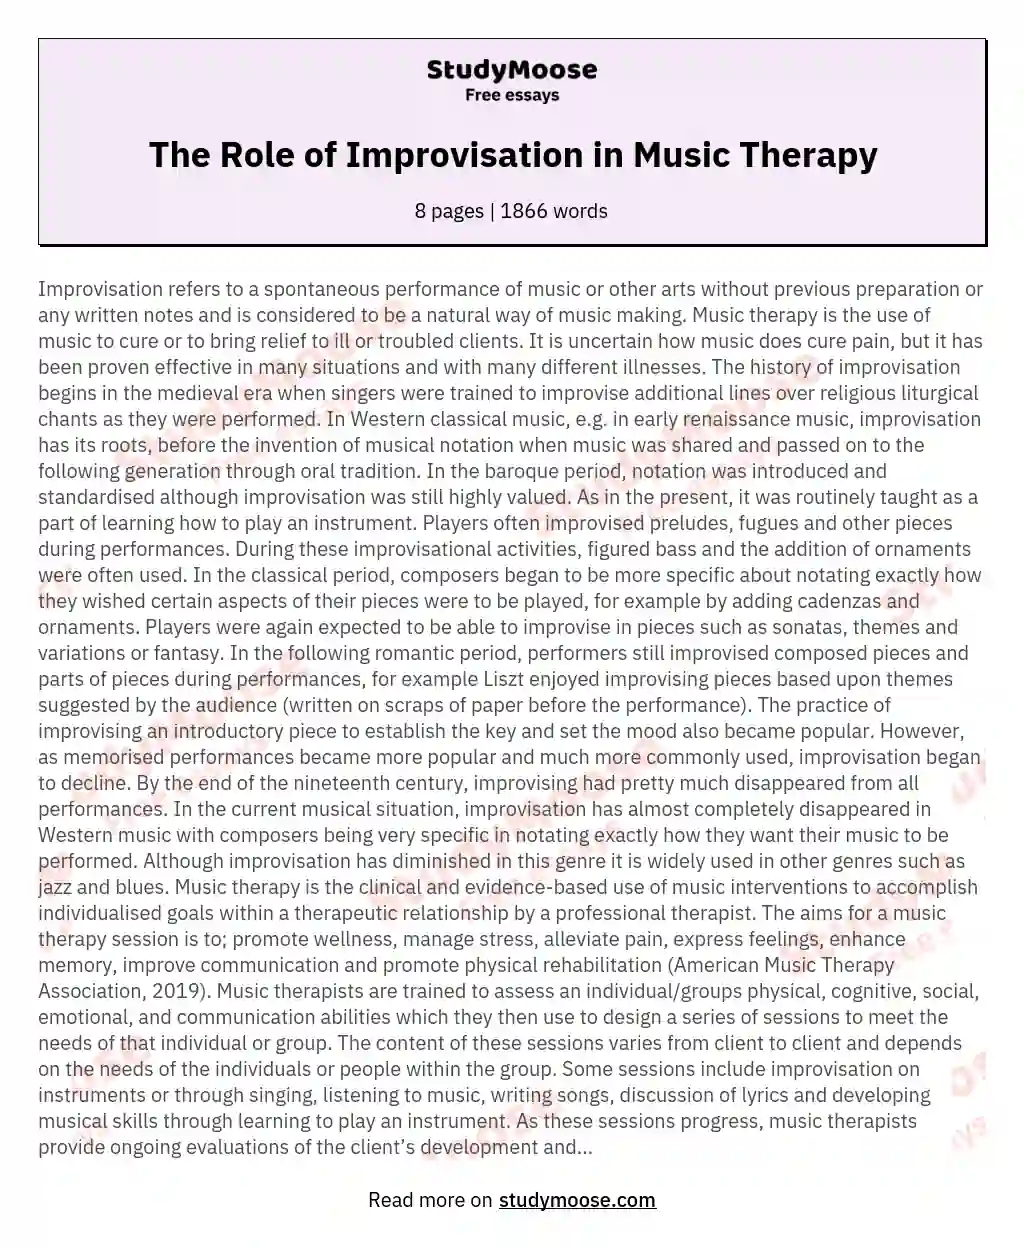 The Role of Improvisation in Music Therapy essay